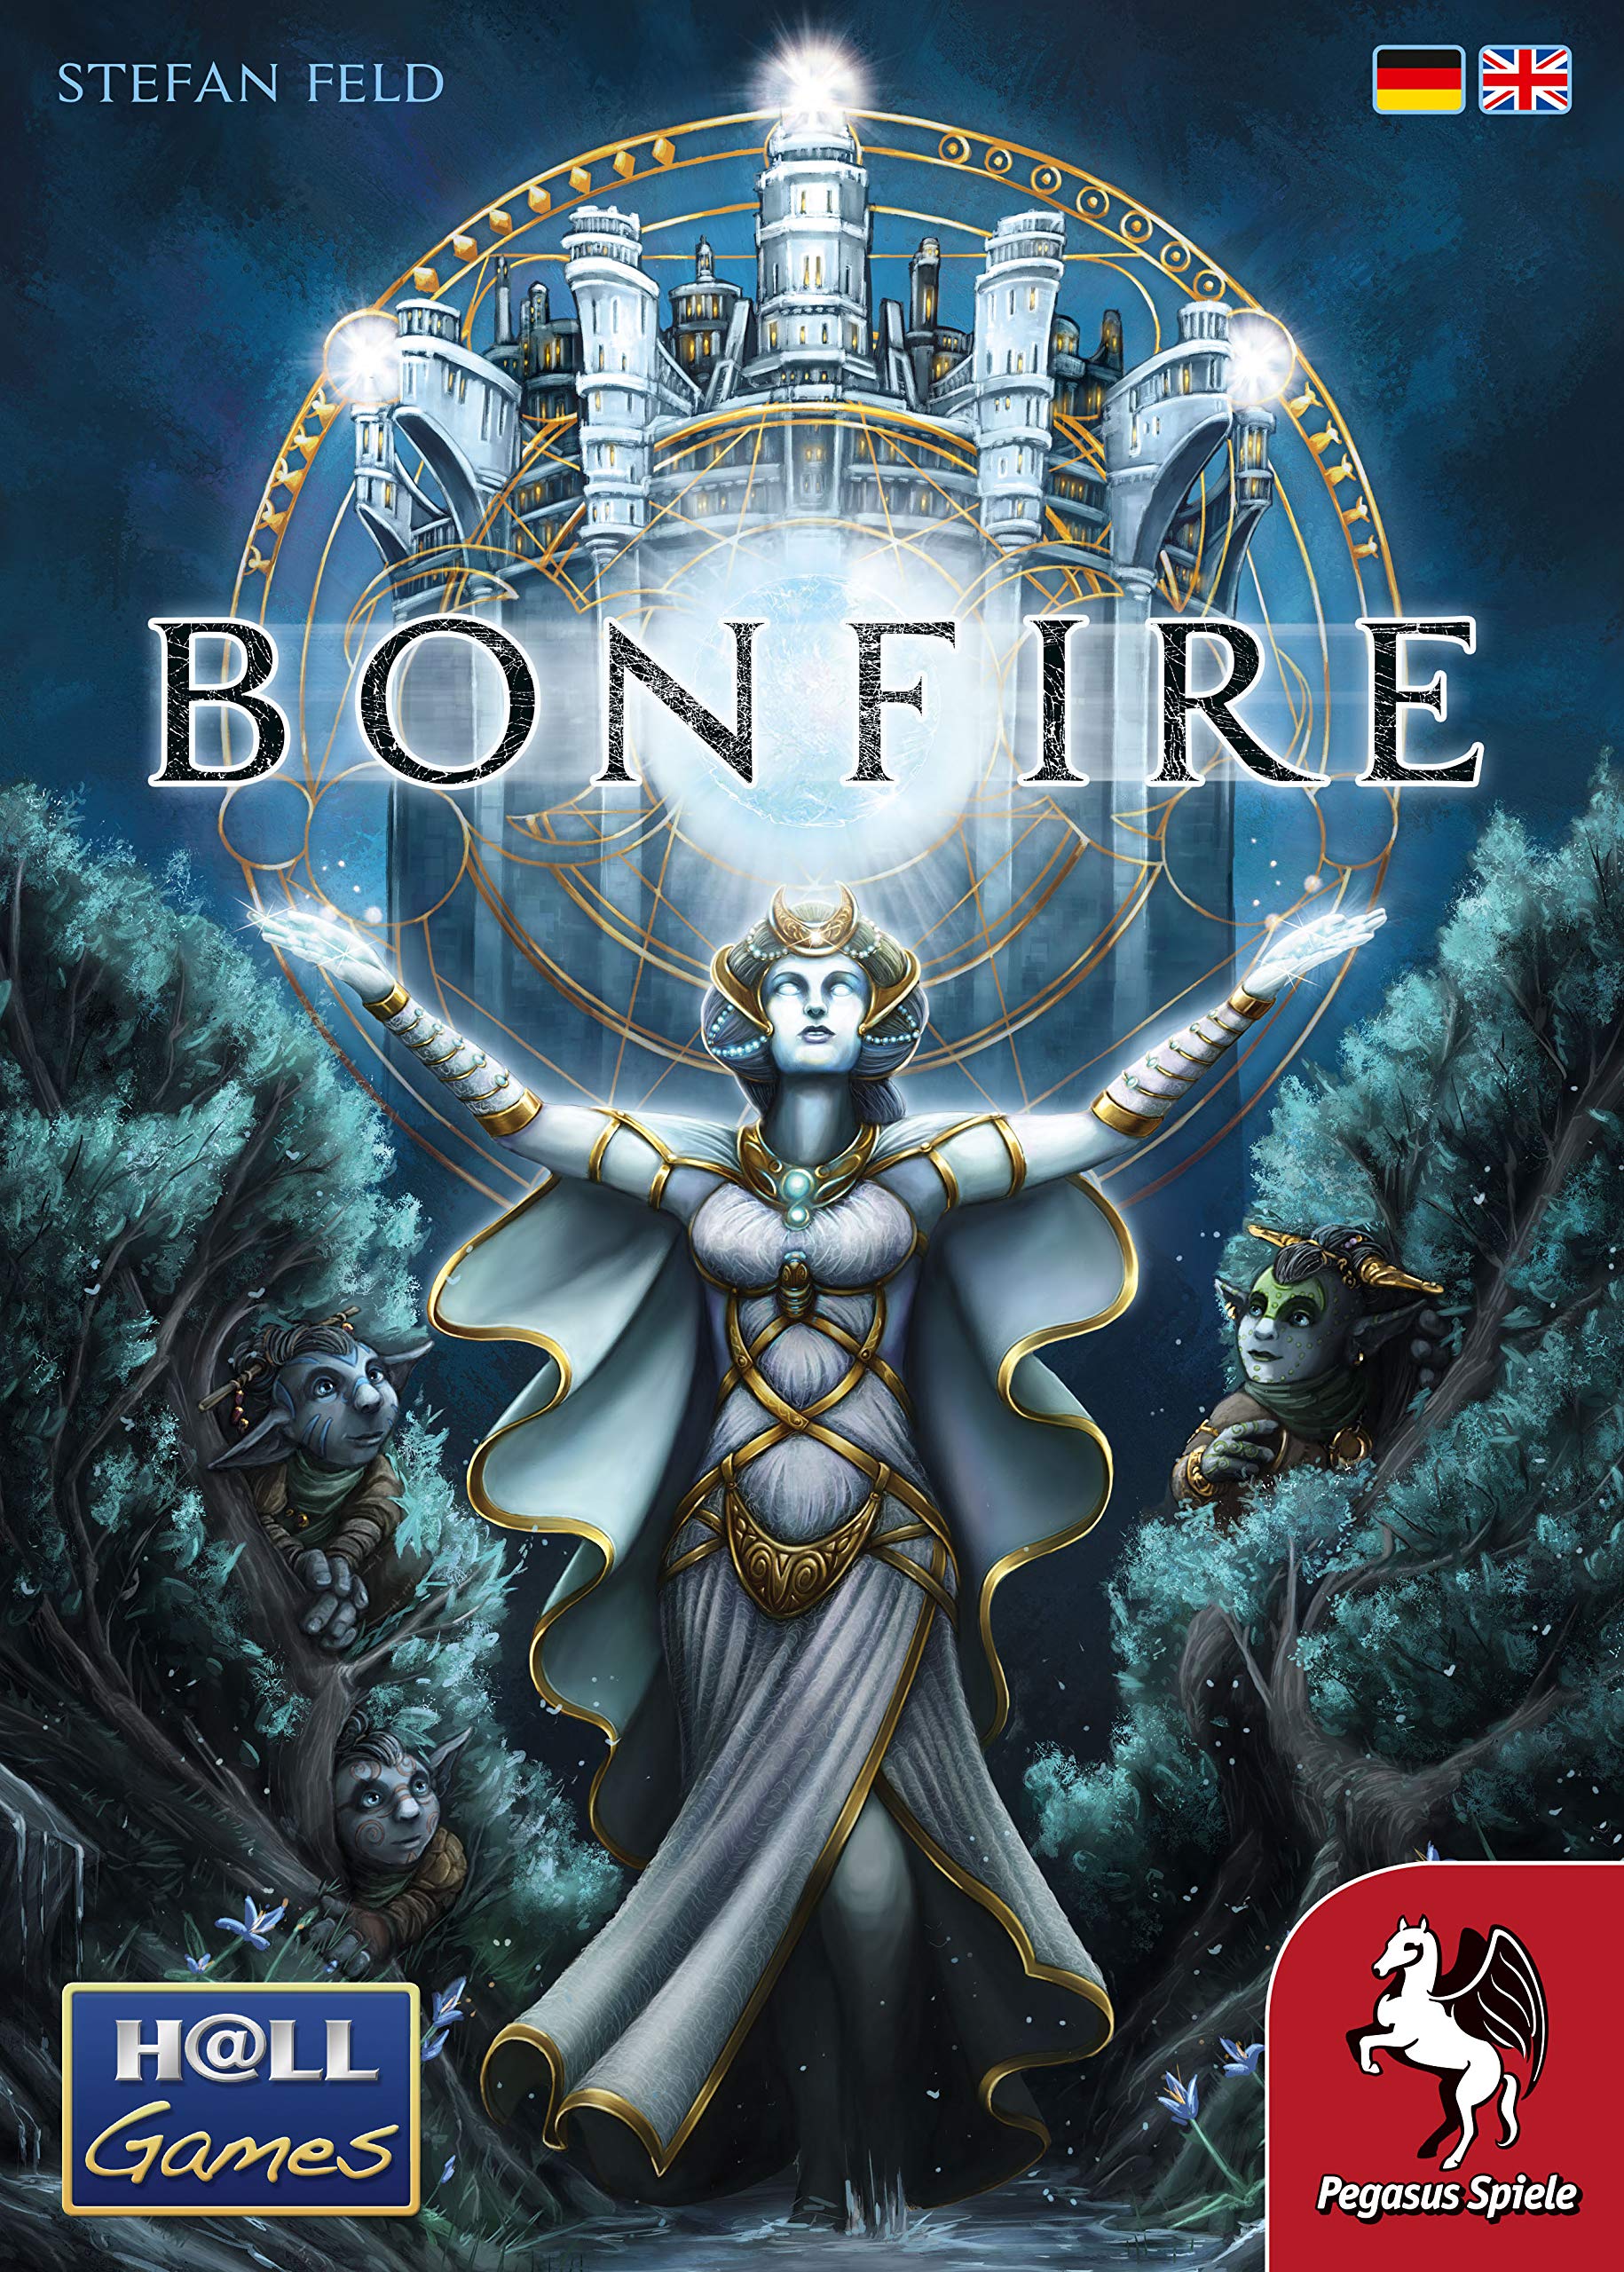 Bonfire – Board Game by Pegasus Spiele 1-4 Players – Board Games for Family – 70-100 Minutes of Gameplay – Games for Family Game Night – Kids and Adults Ages 12+ - English Version